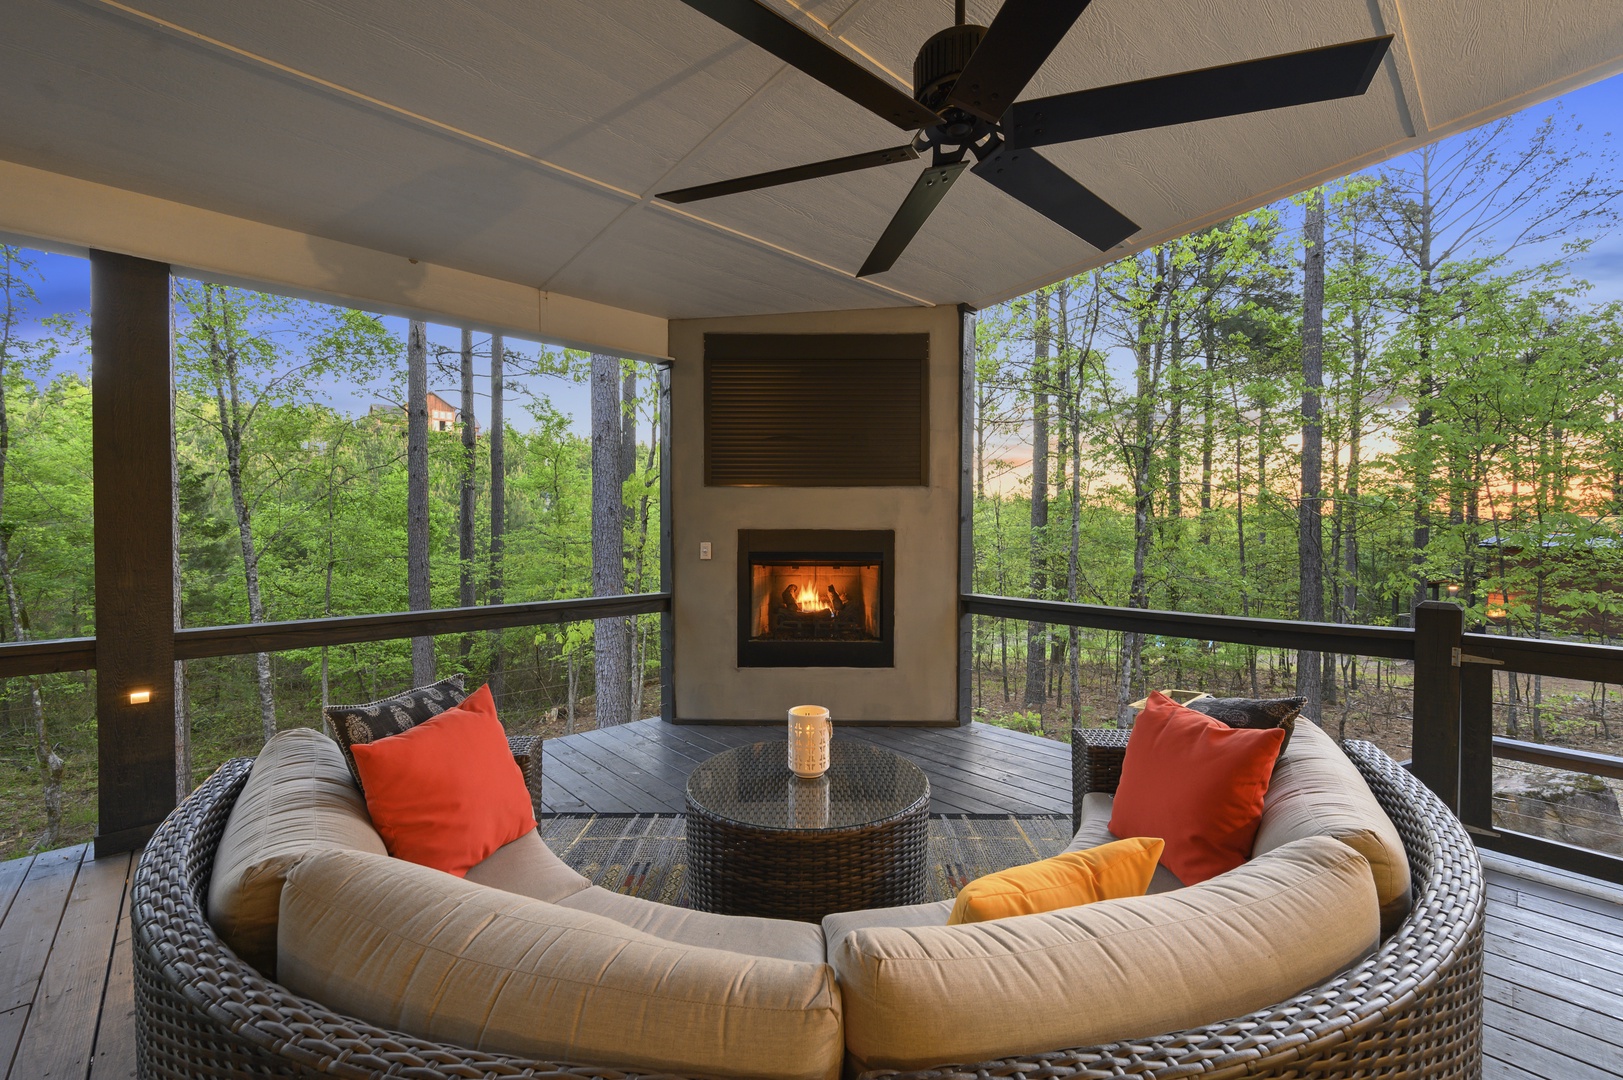 Step out to the spacious covered back deck for morning coffee or evening wine